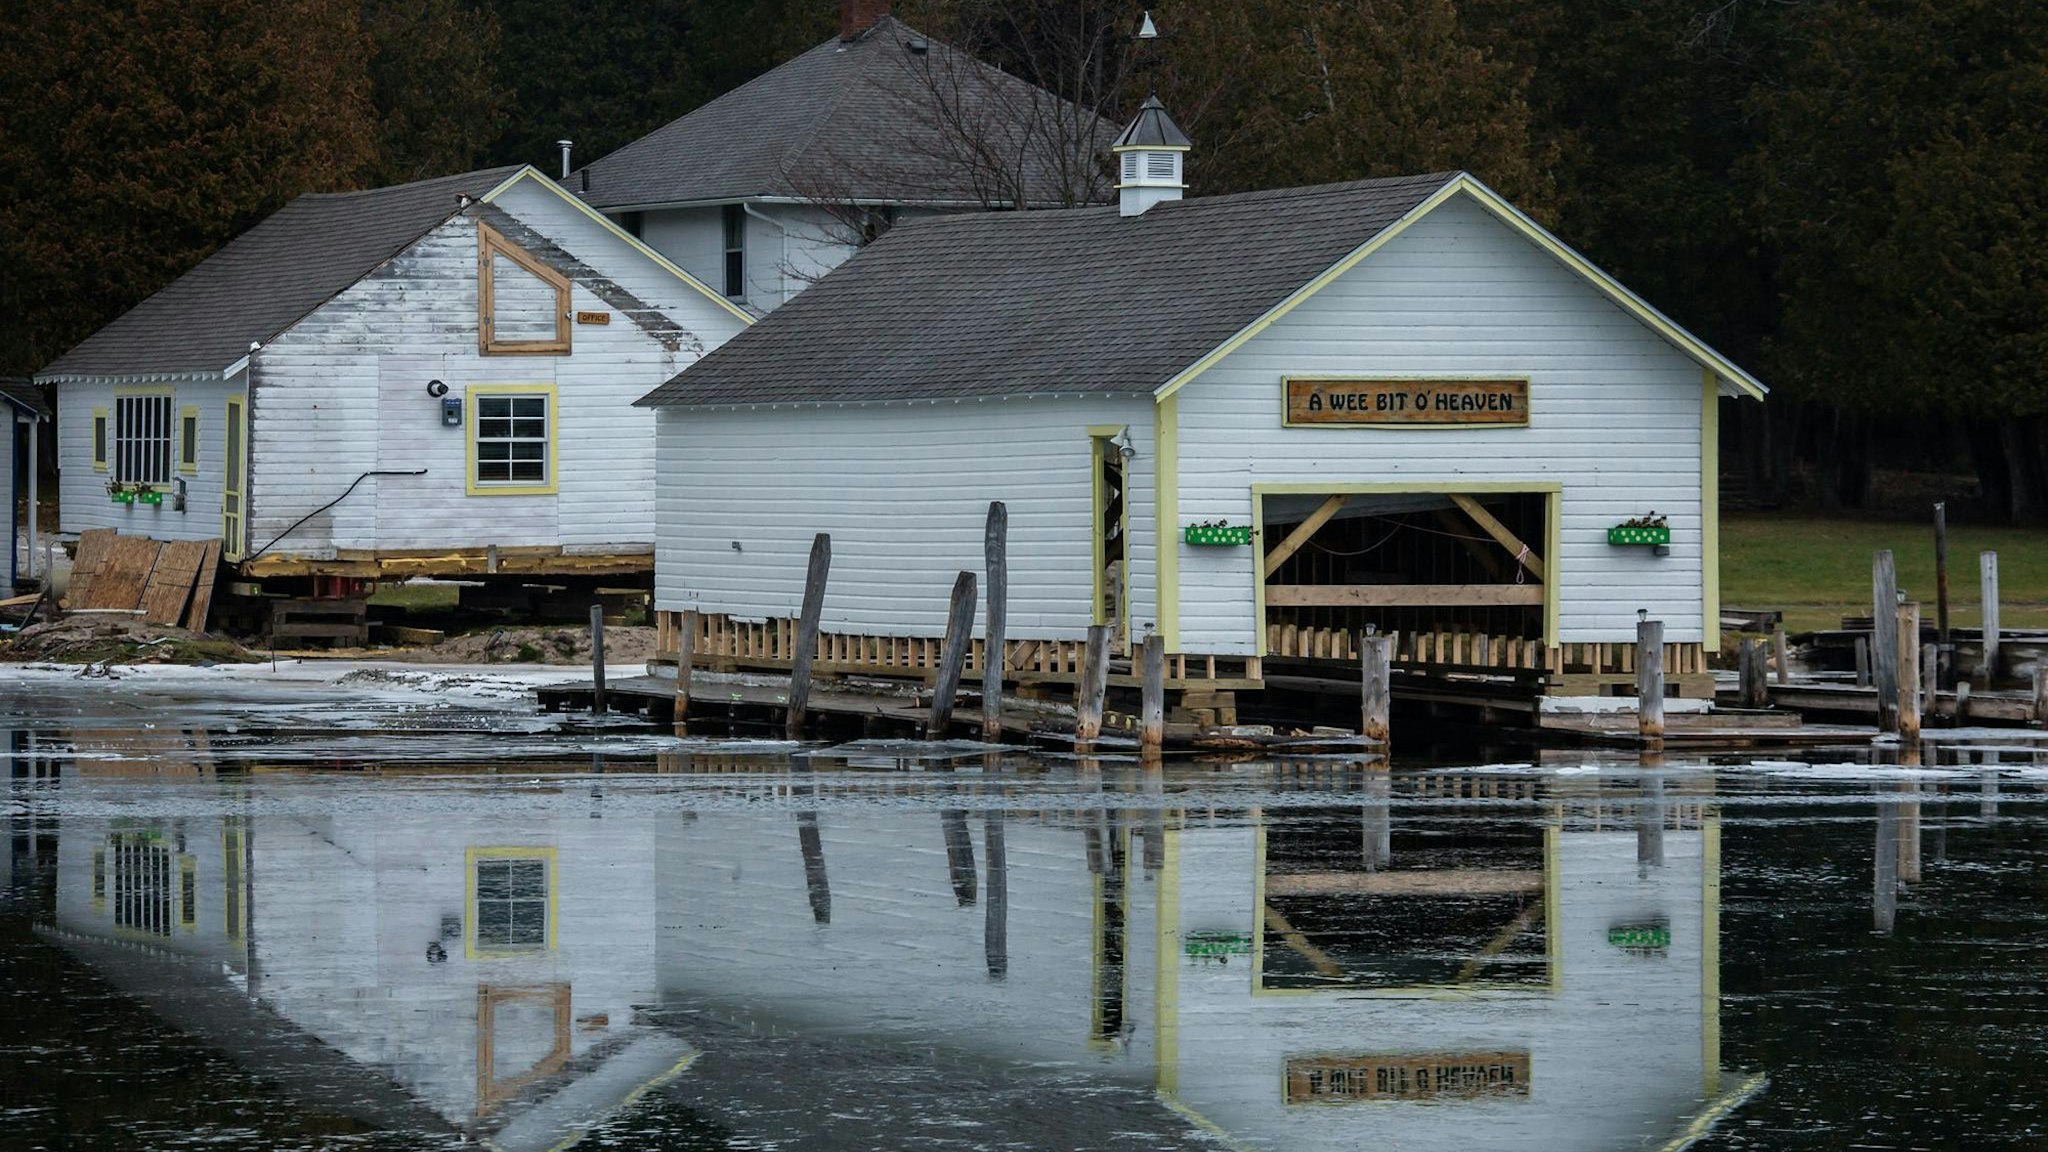 Boat houses are being removed from flooded docks in Snows Channel at Les Cheneaux Islands in the Upper Peninsula of Michigan on November 20, 2019. (Zbigniew Bzdak/Chicago Tribune/Tribune News Service via Getty Images)